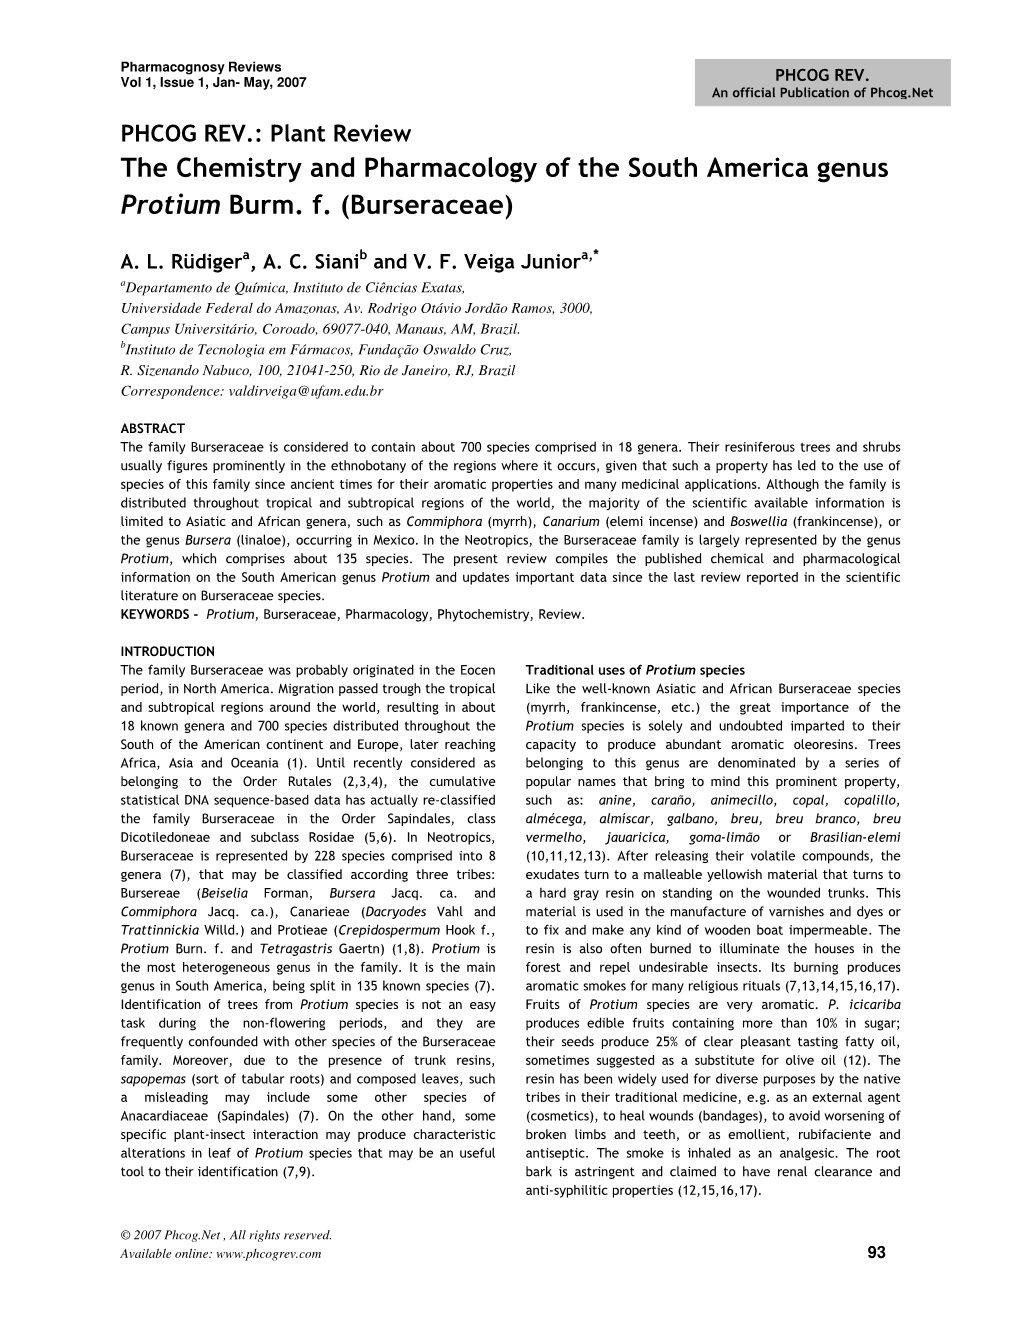 The Chemistry and Pharmacology of the South America Genus Protium Burm